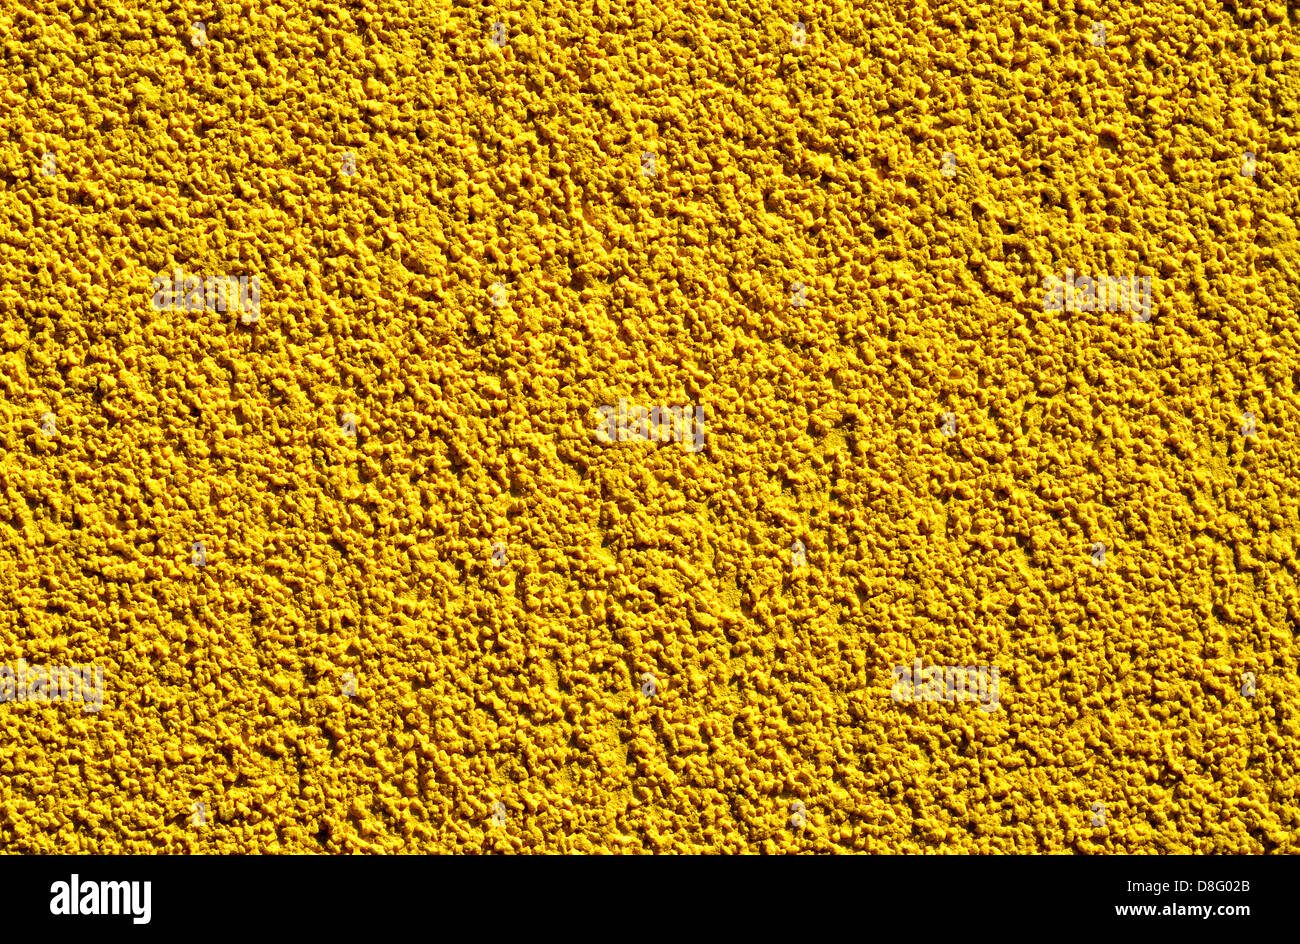 Detail of a rugged yellow wall suitable as background Stock Photo